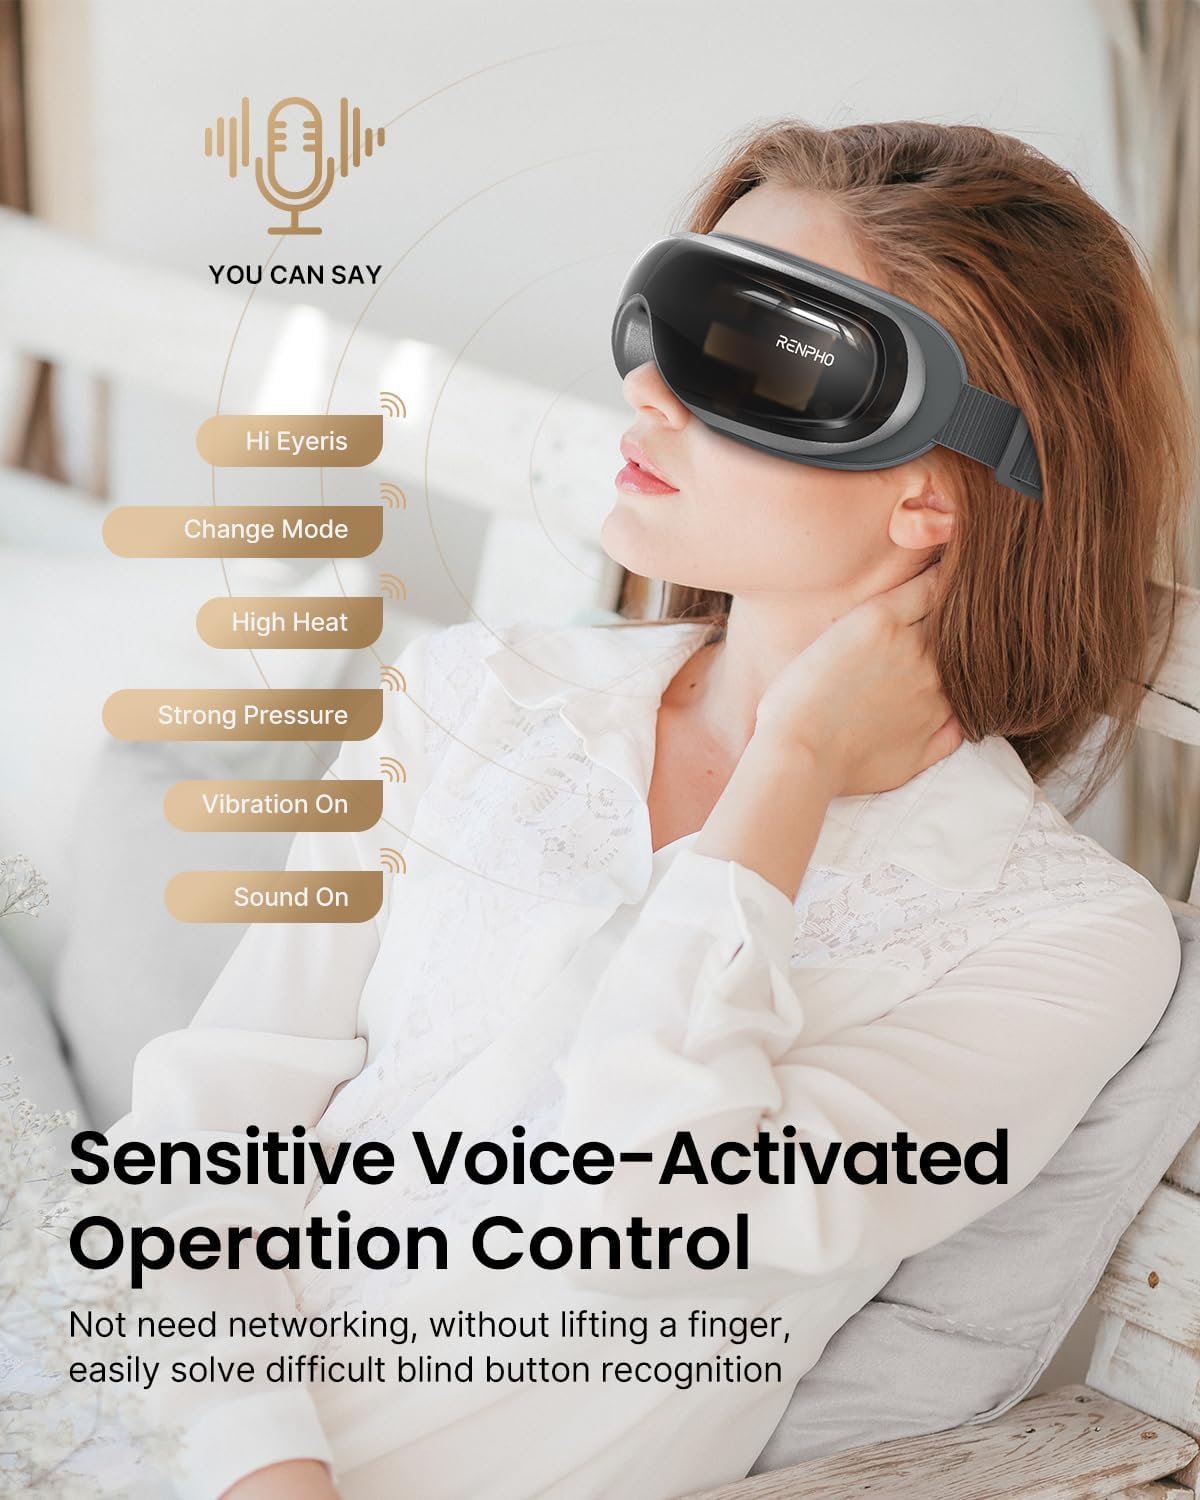 RENPHO Eyeris 3 - Voice Controlled Eye Massager with Preset Commands & Heat, Heated Eye Mask with DIY Massage Setting, Bluetooth Music Eye Relax Devices for Migraines Relief,Improve Sleep,Ideal Gift